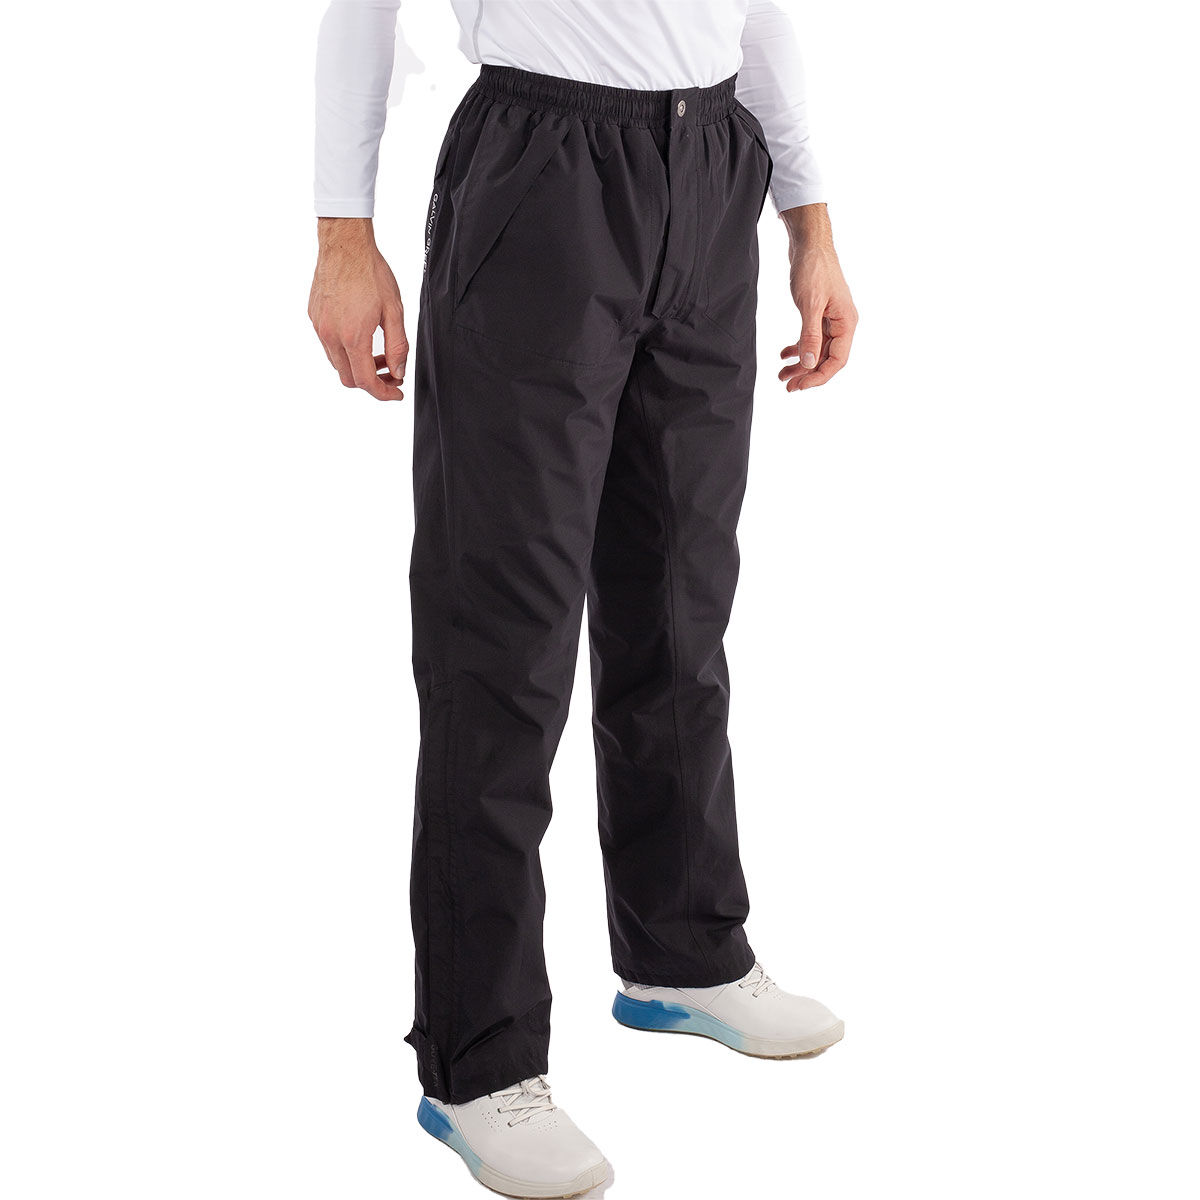 Galvin Green Mens Black Lightweight Andy GORE-TEX Waterproof Long Fit Golf Trousers, Size: XL | American Golf